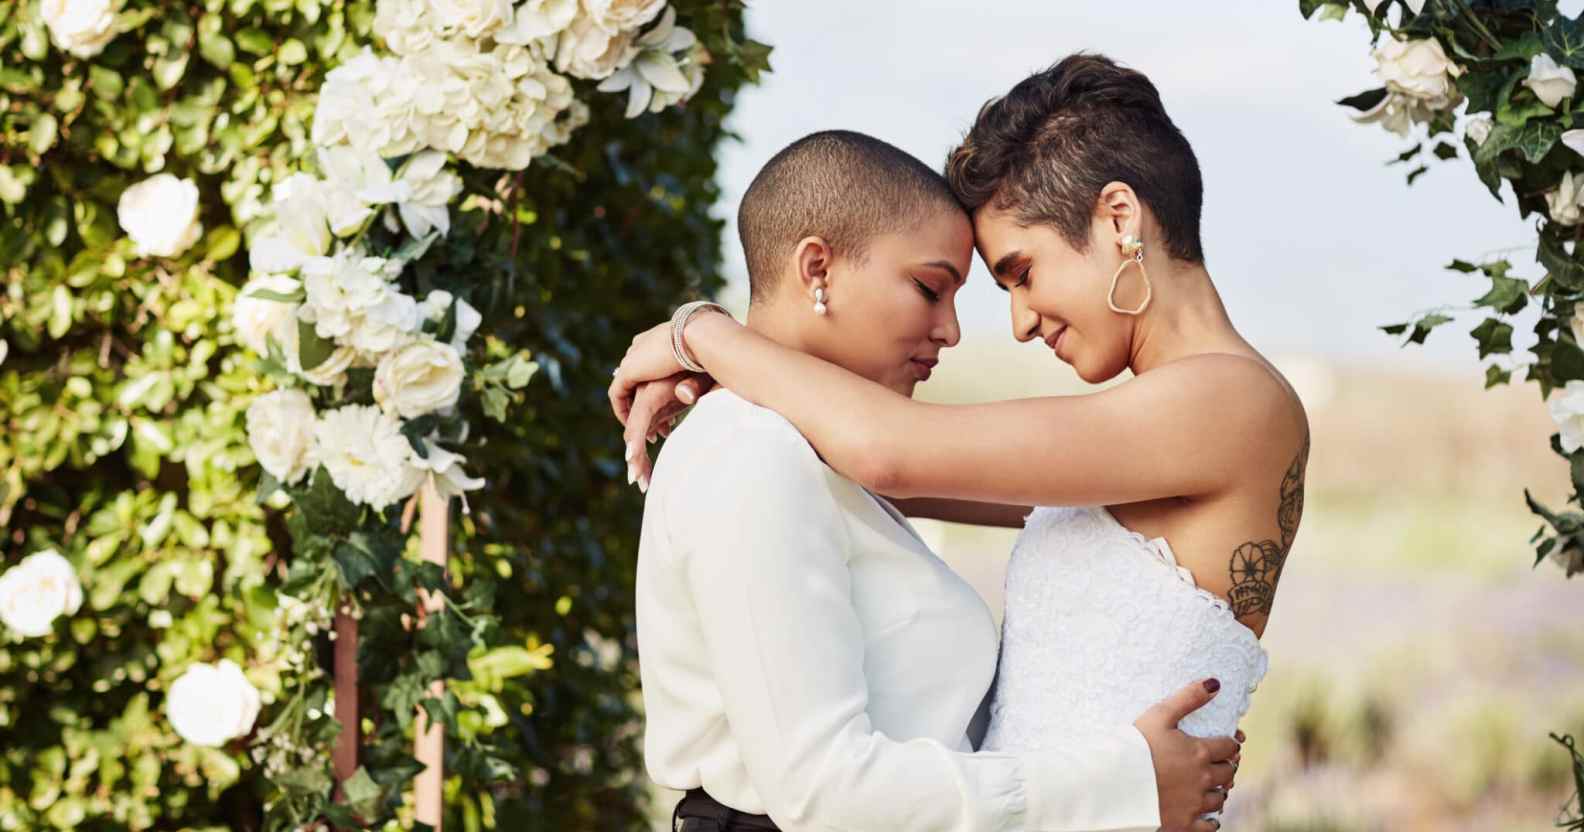 Cropped shot of an affectionate young lesbian couple sharing an intimate moment with their arms around each other on their wedding day